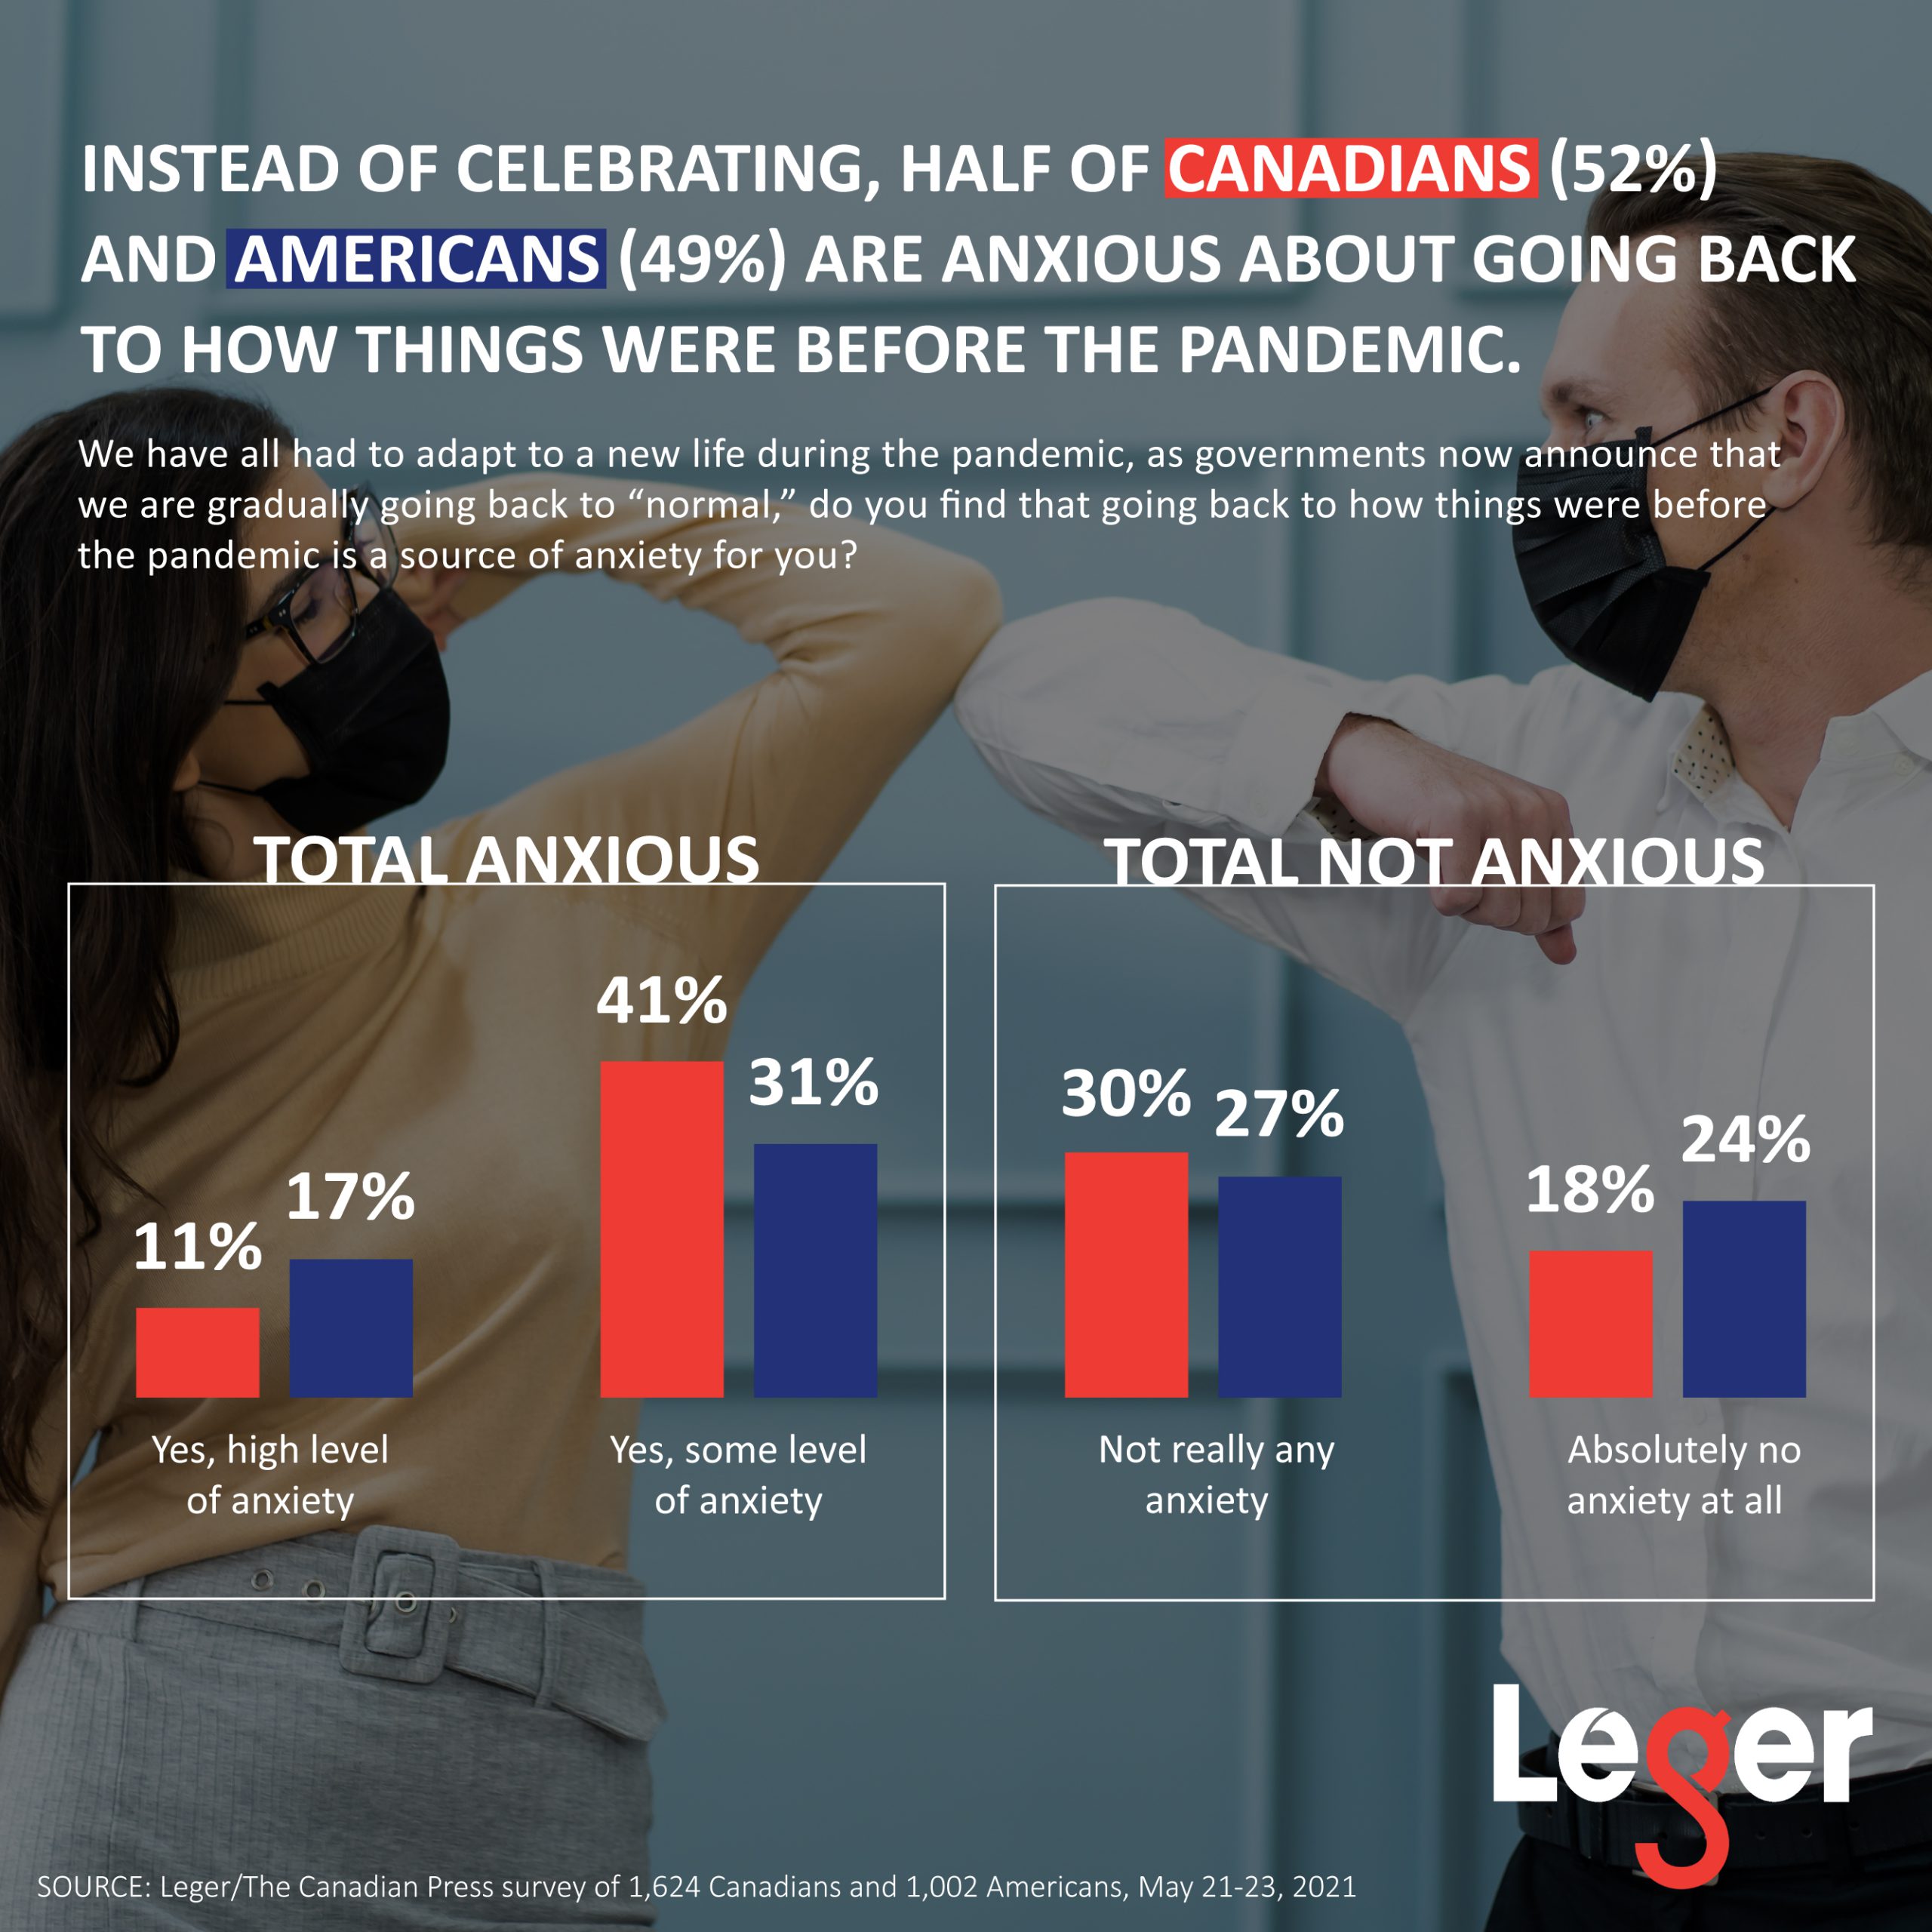 Instead of celebrating, half of Canadians (52%) and Americans (49%) are anxious about going back to how things were before the pandemic.